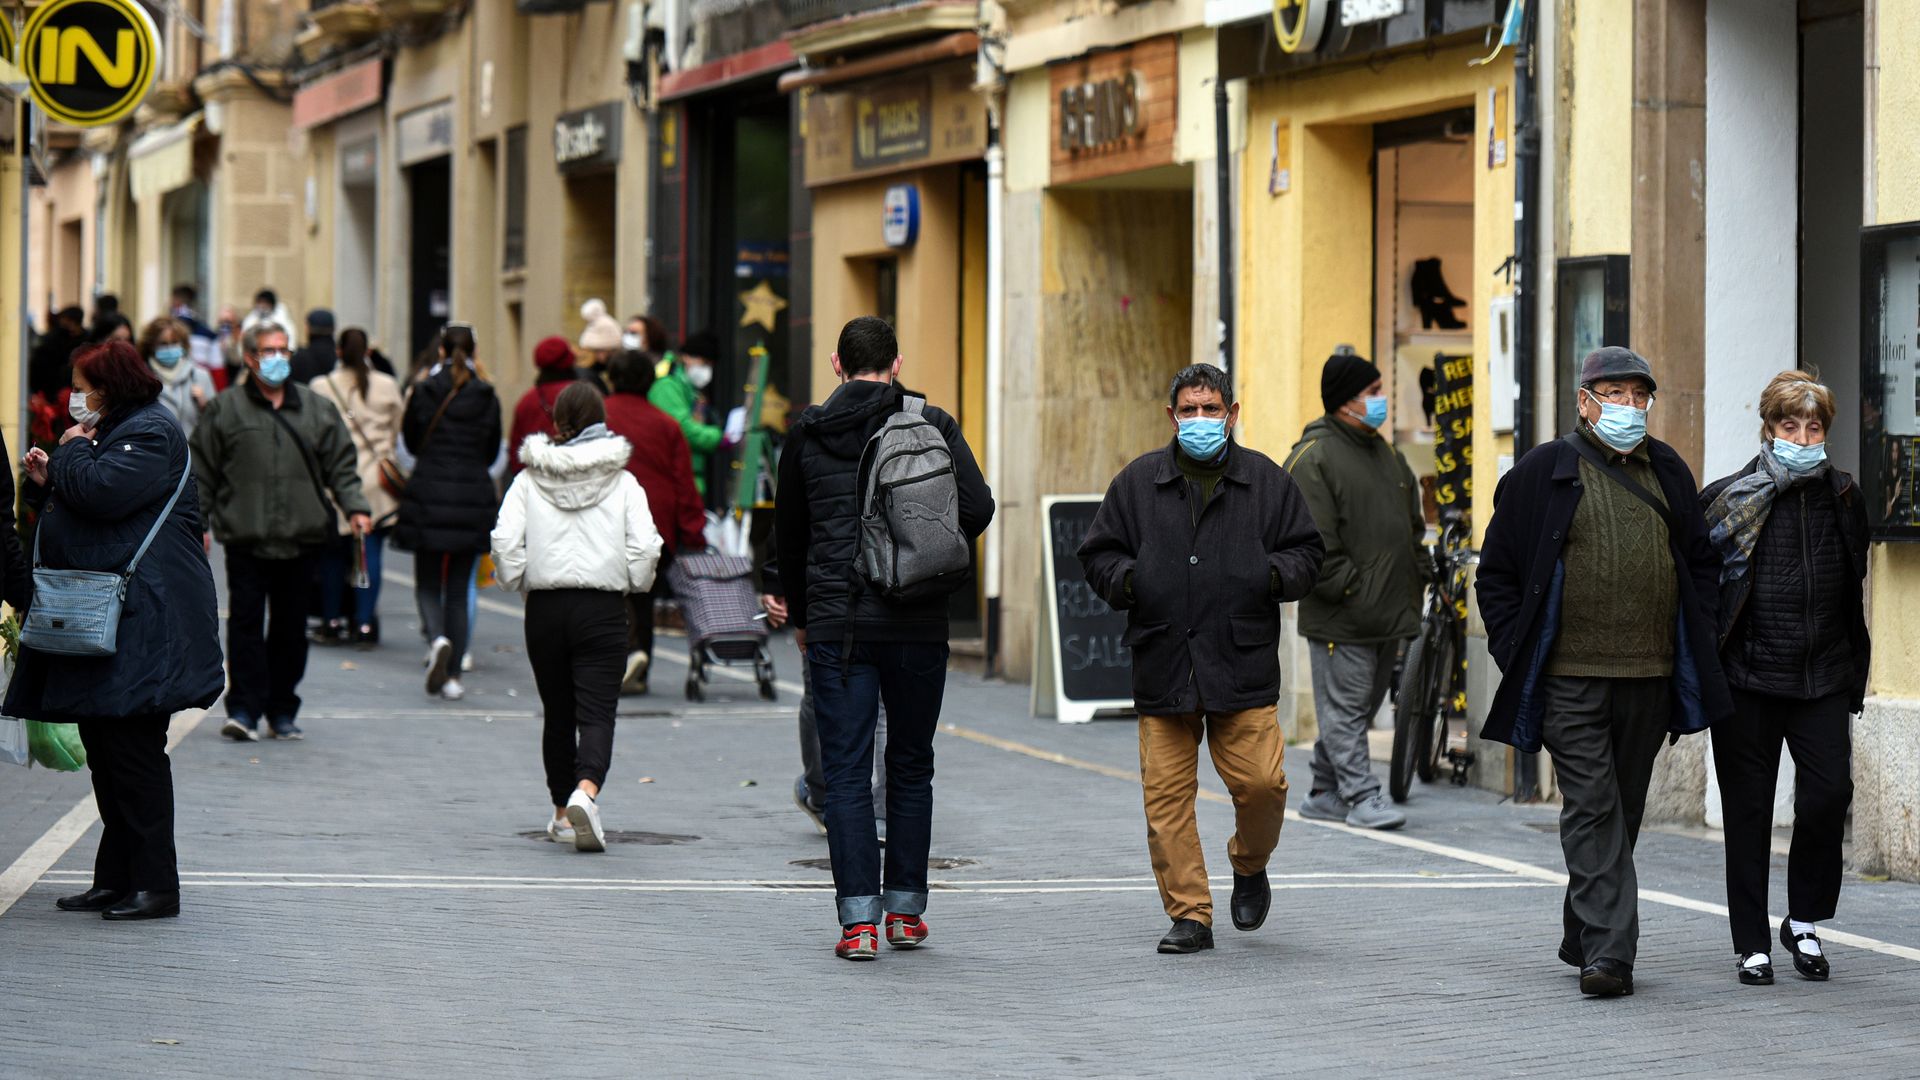 eople wearing face masks as precautionary measures against the spread of covid-19 are seen walking along a commercial area at the Vendrell Tarragona.